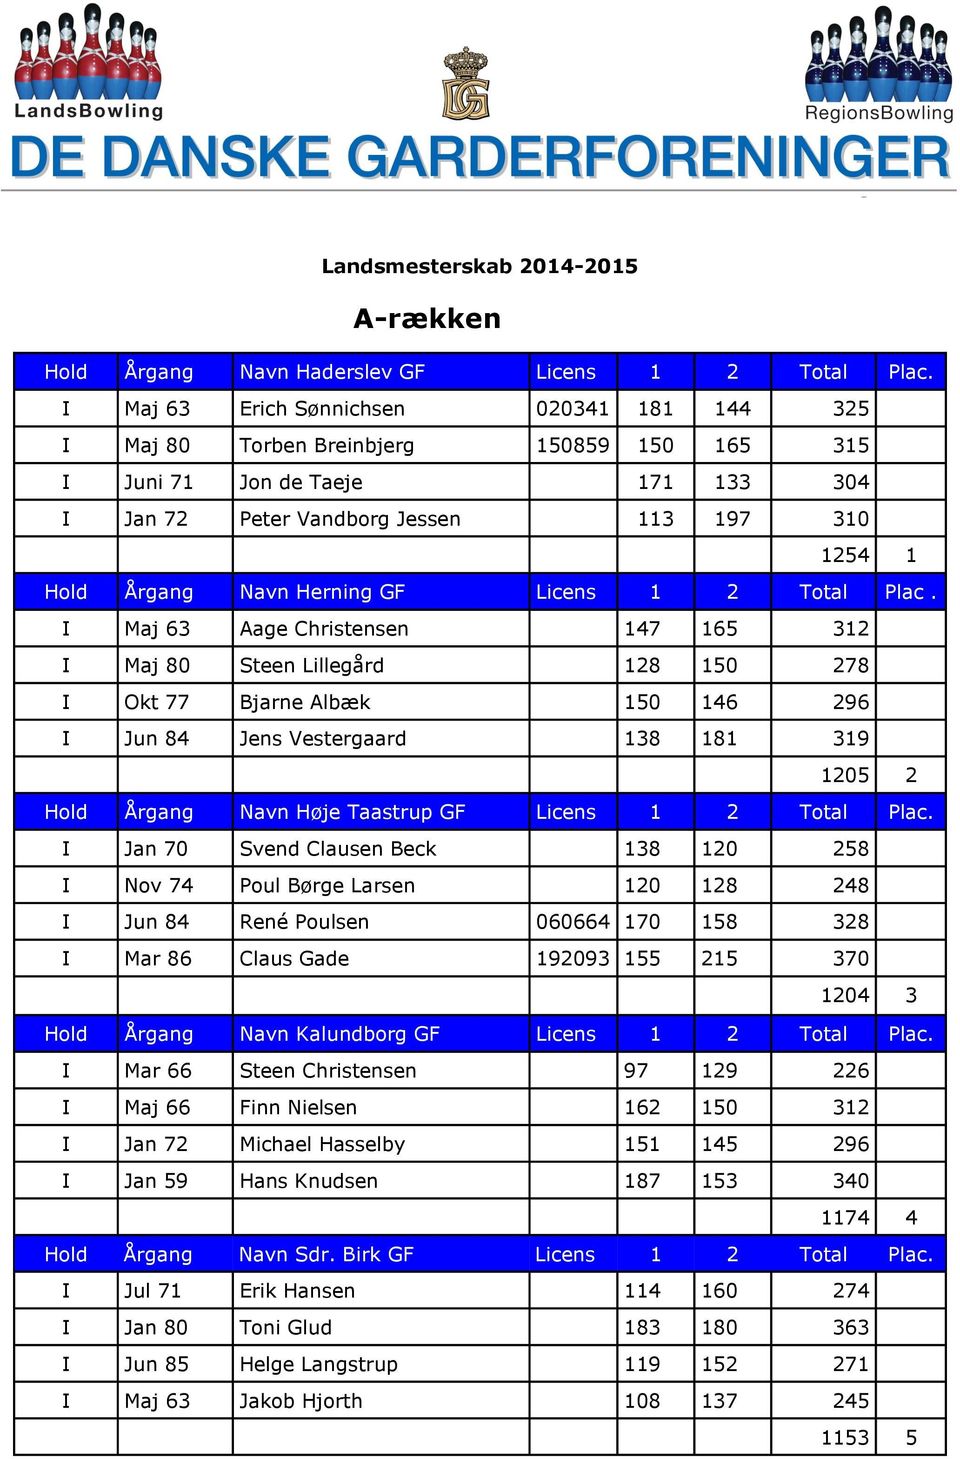 Herning GF Licens 1 2 Total Plac.